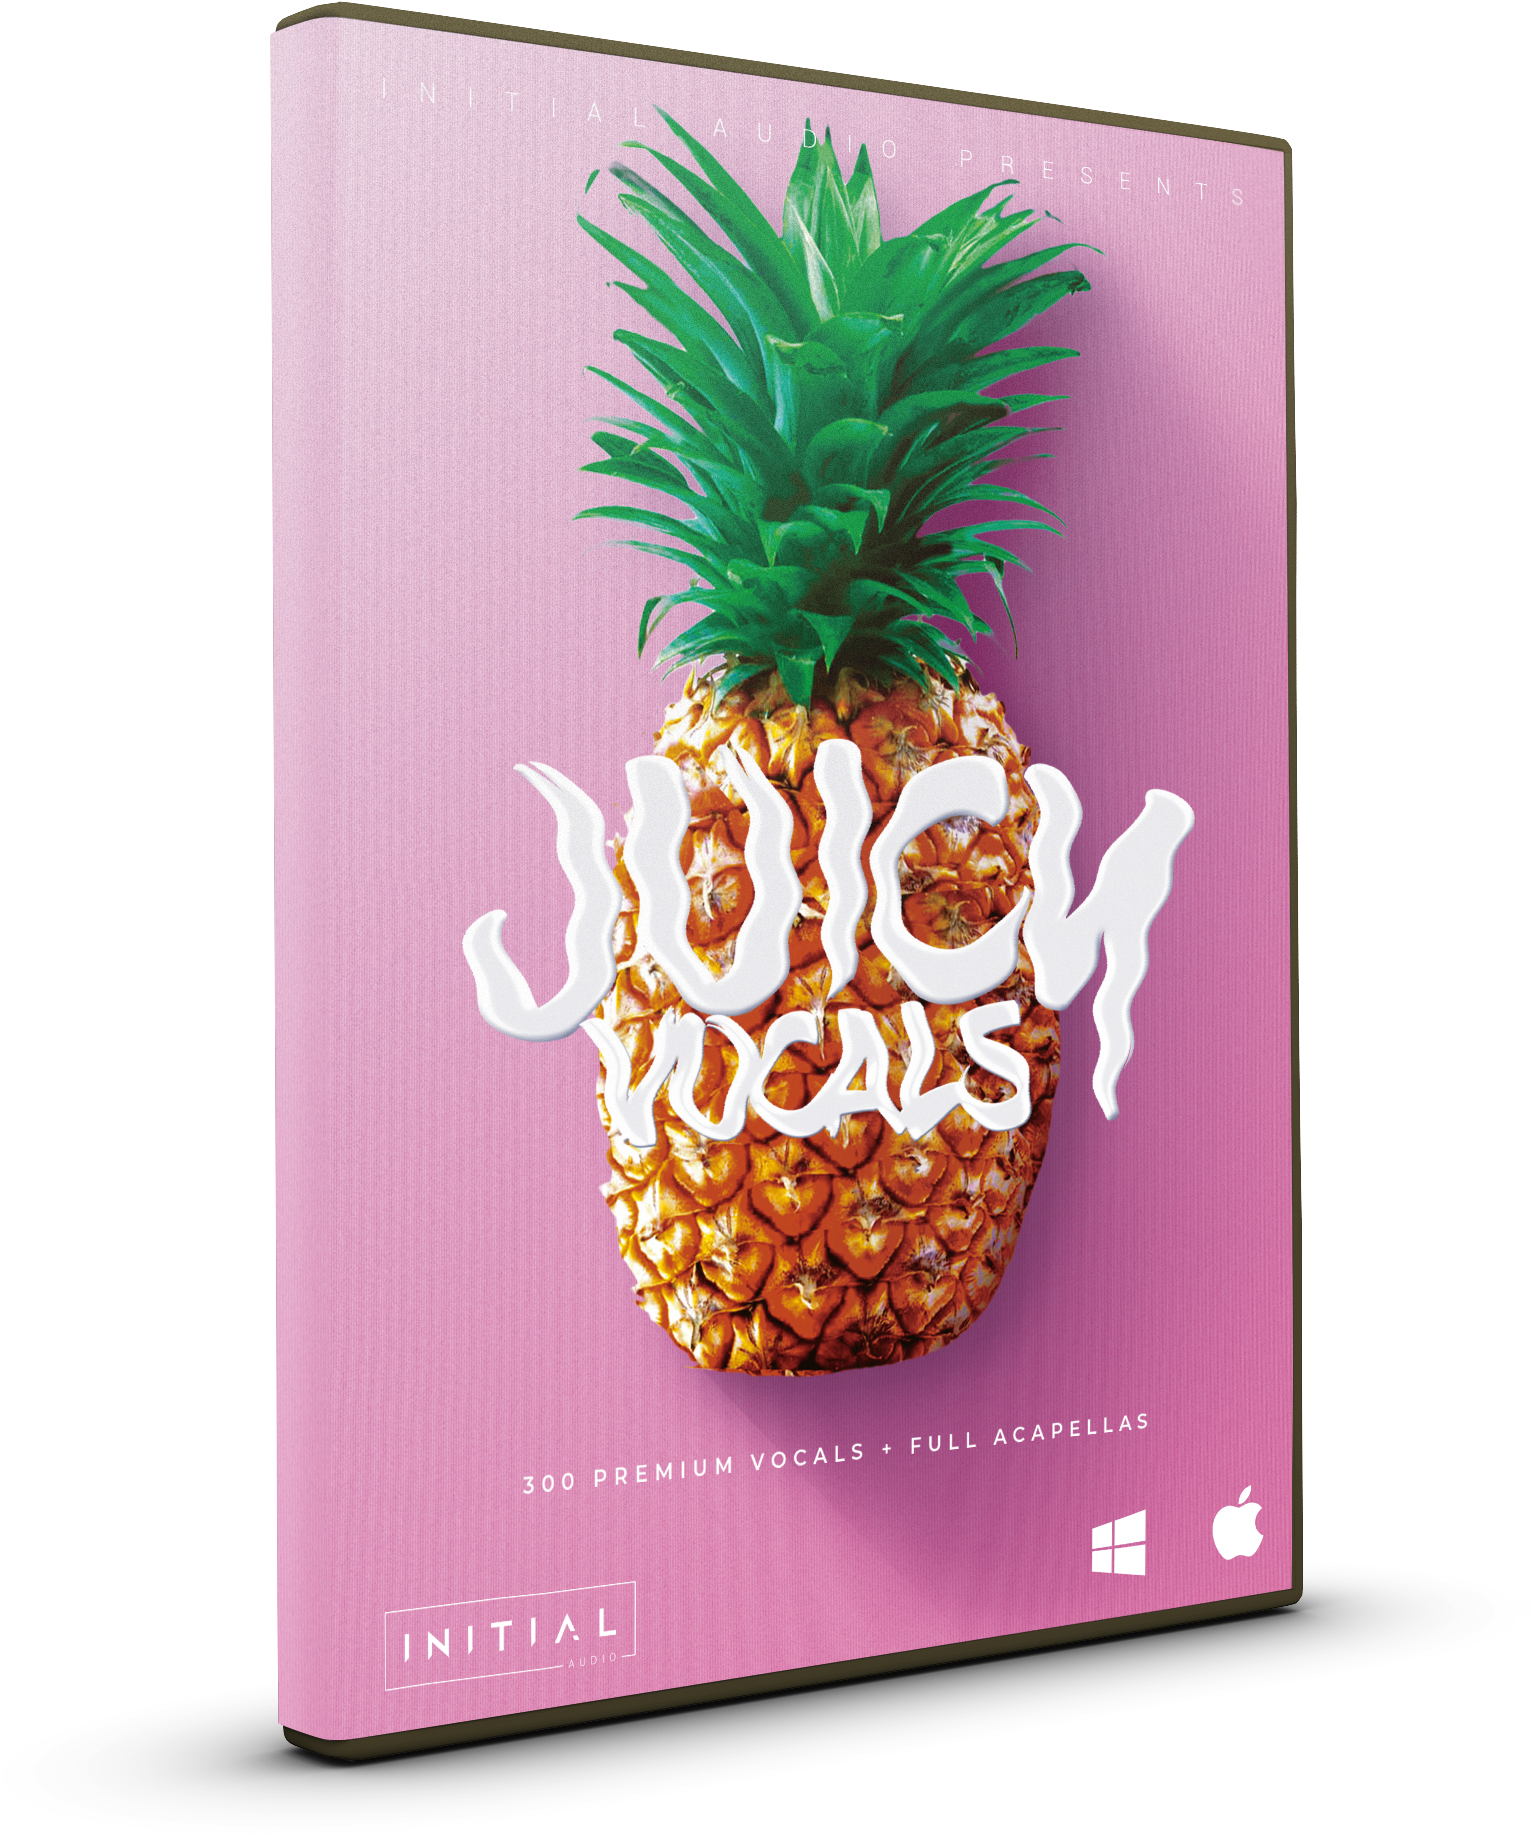 Juicy Vocals Audio Product Packaging